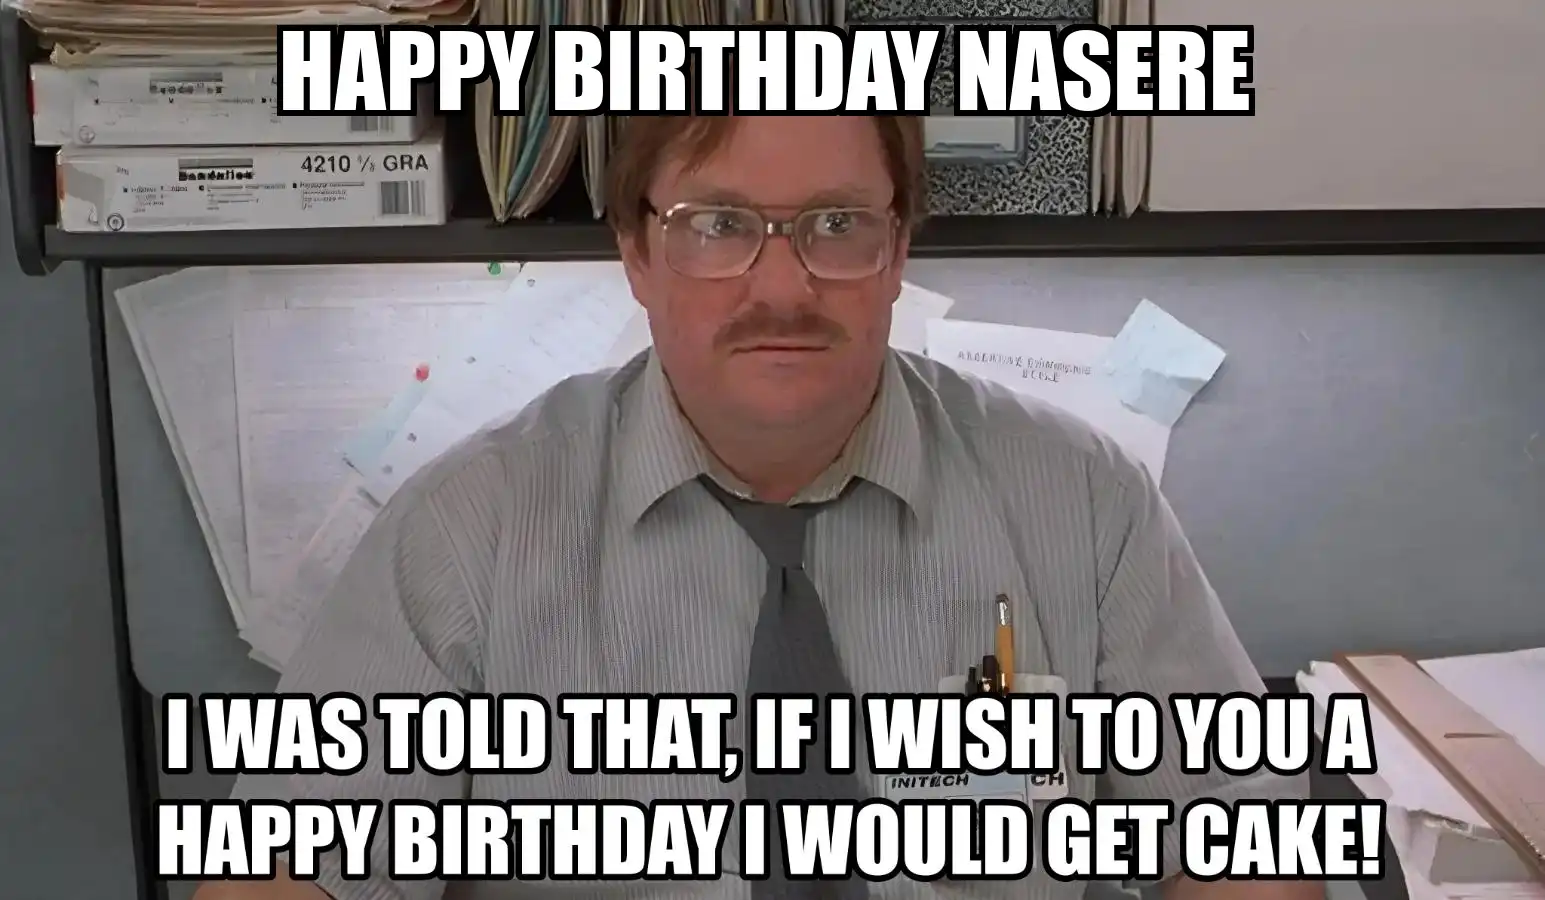 Happy Birthday Nasere I Would Get A Cake Meme